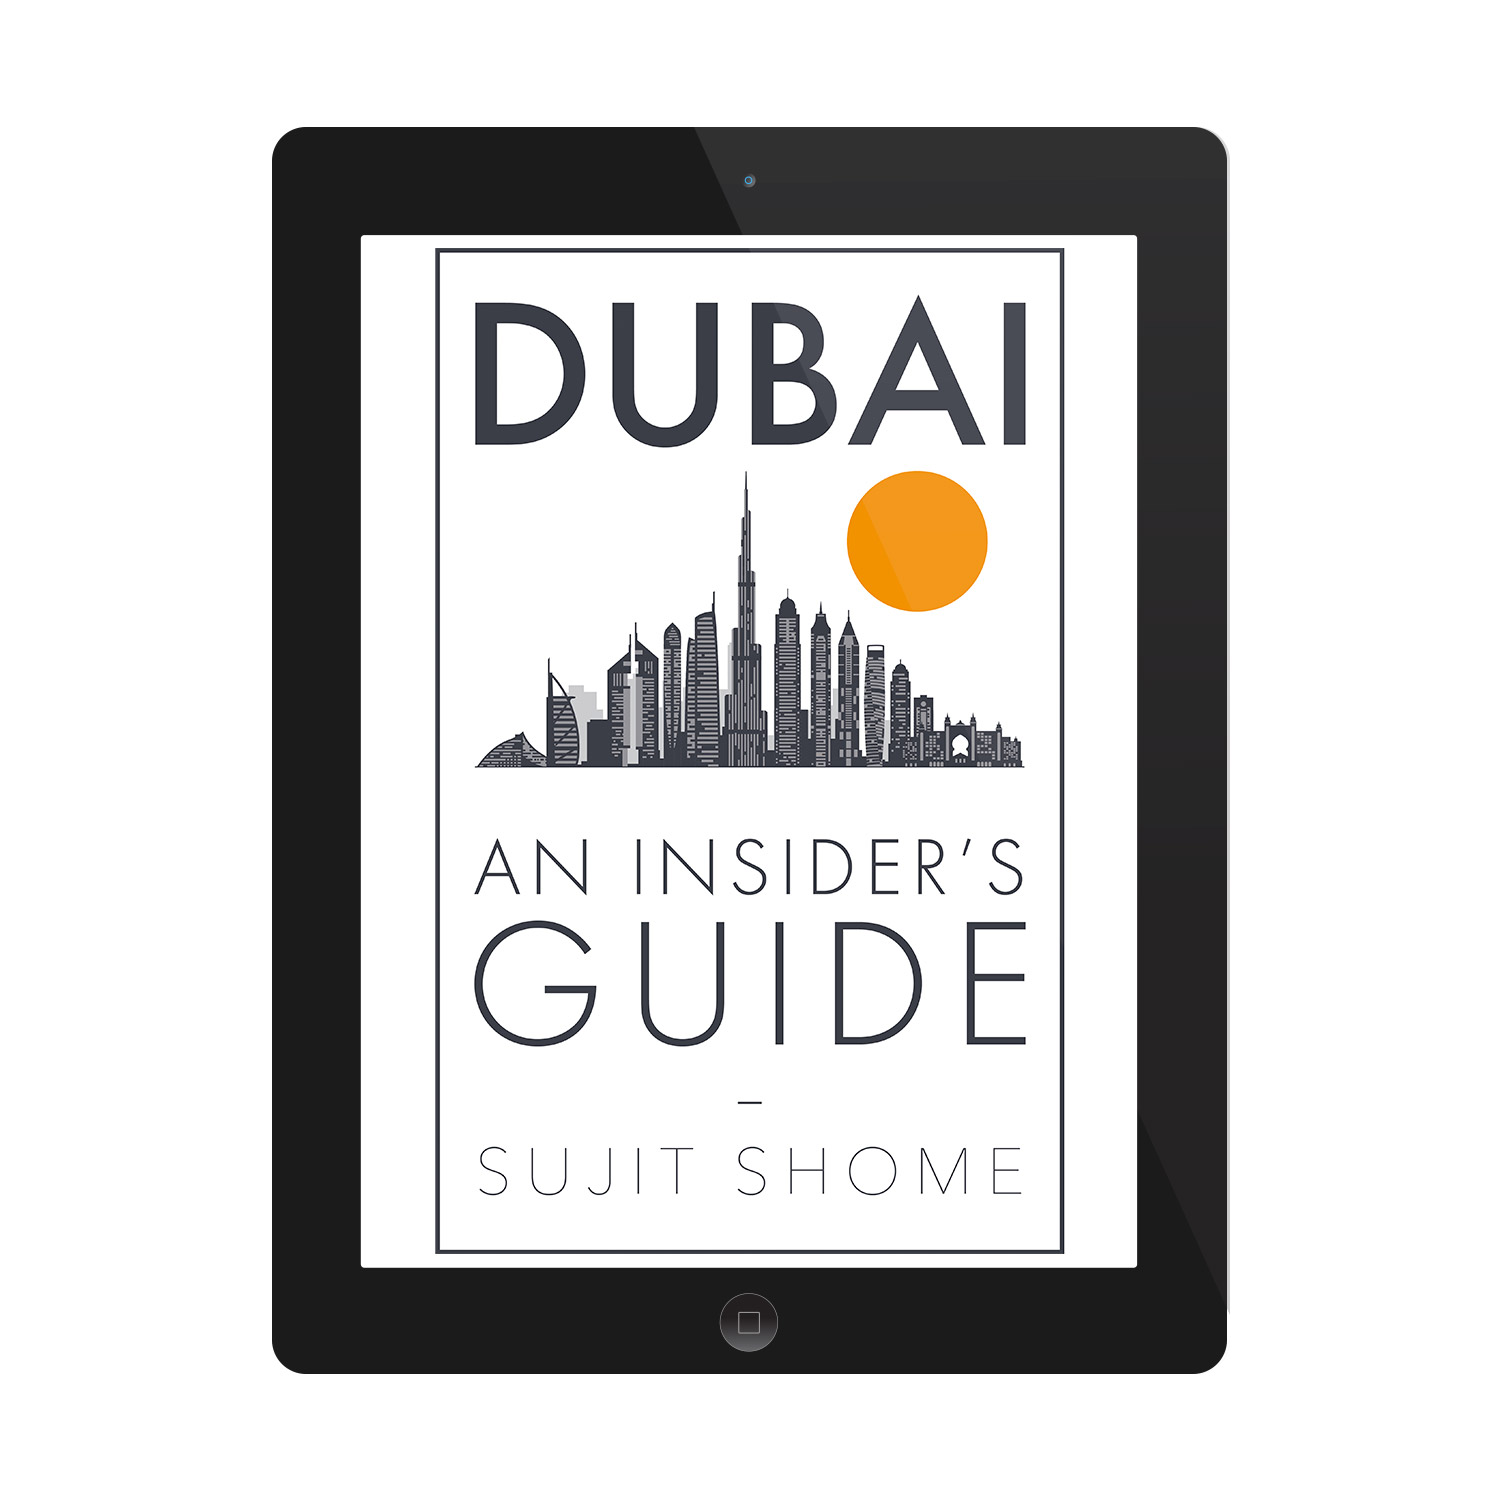 'Dubai: An Insider's Guide' is an informed review to one of the busiest cities in the Middle East. The author is Sujit Shome. The book cover and interior were designed by Mark Thomas, of coverness.com. To find out more about my book design services, please visit www.coverness.com.